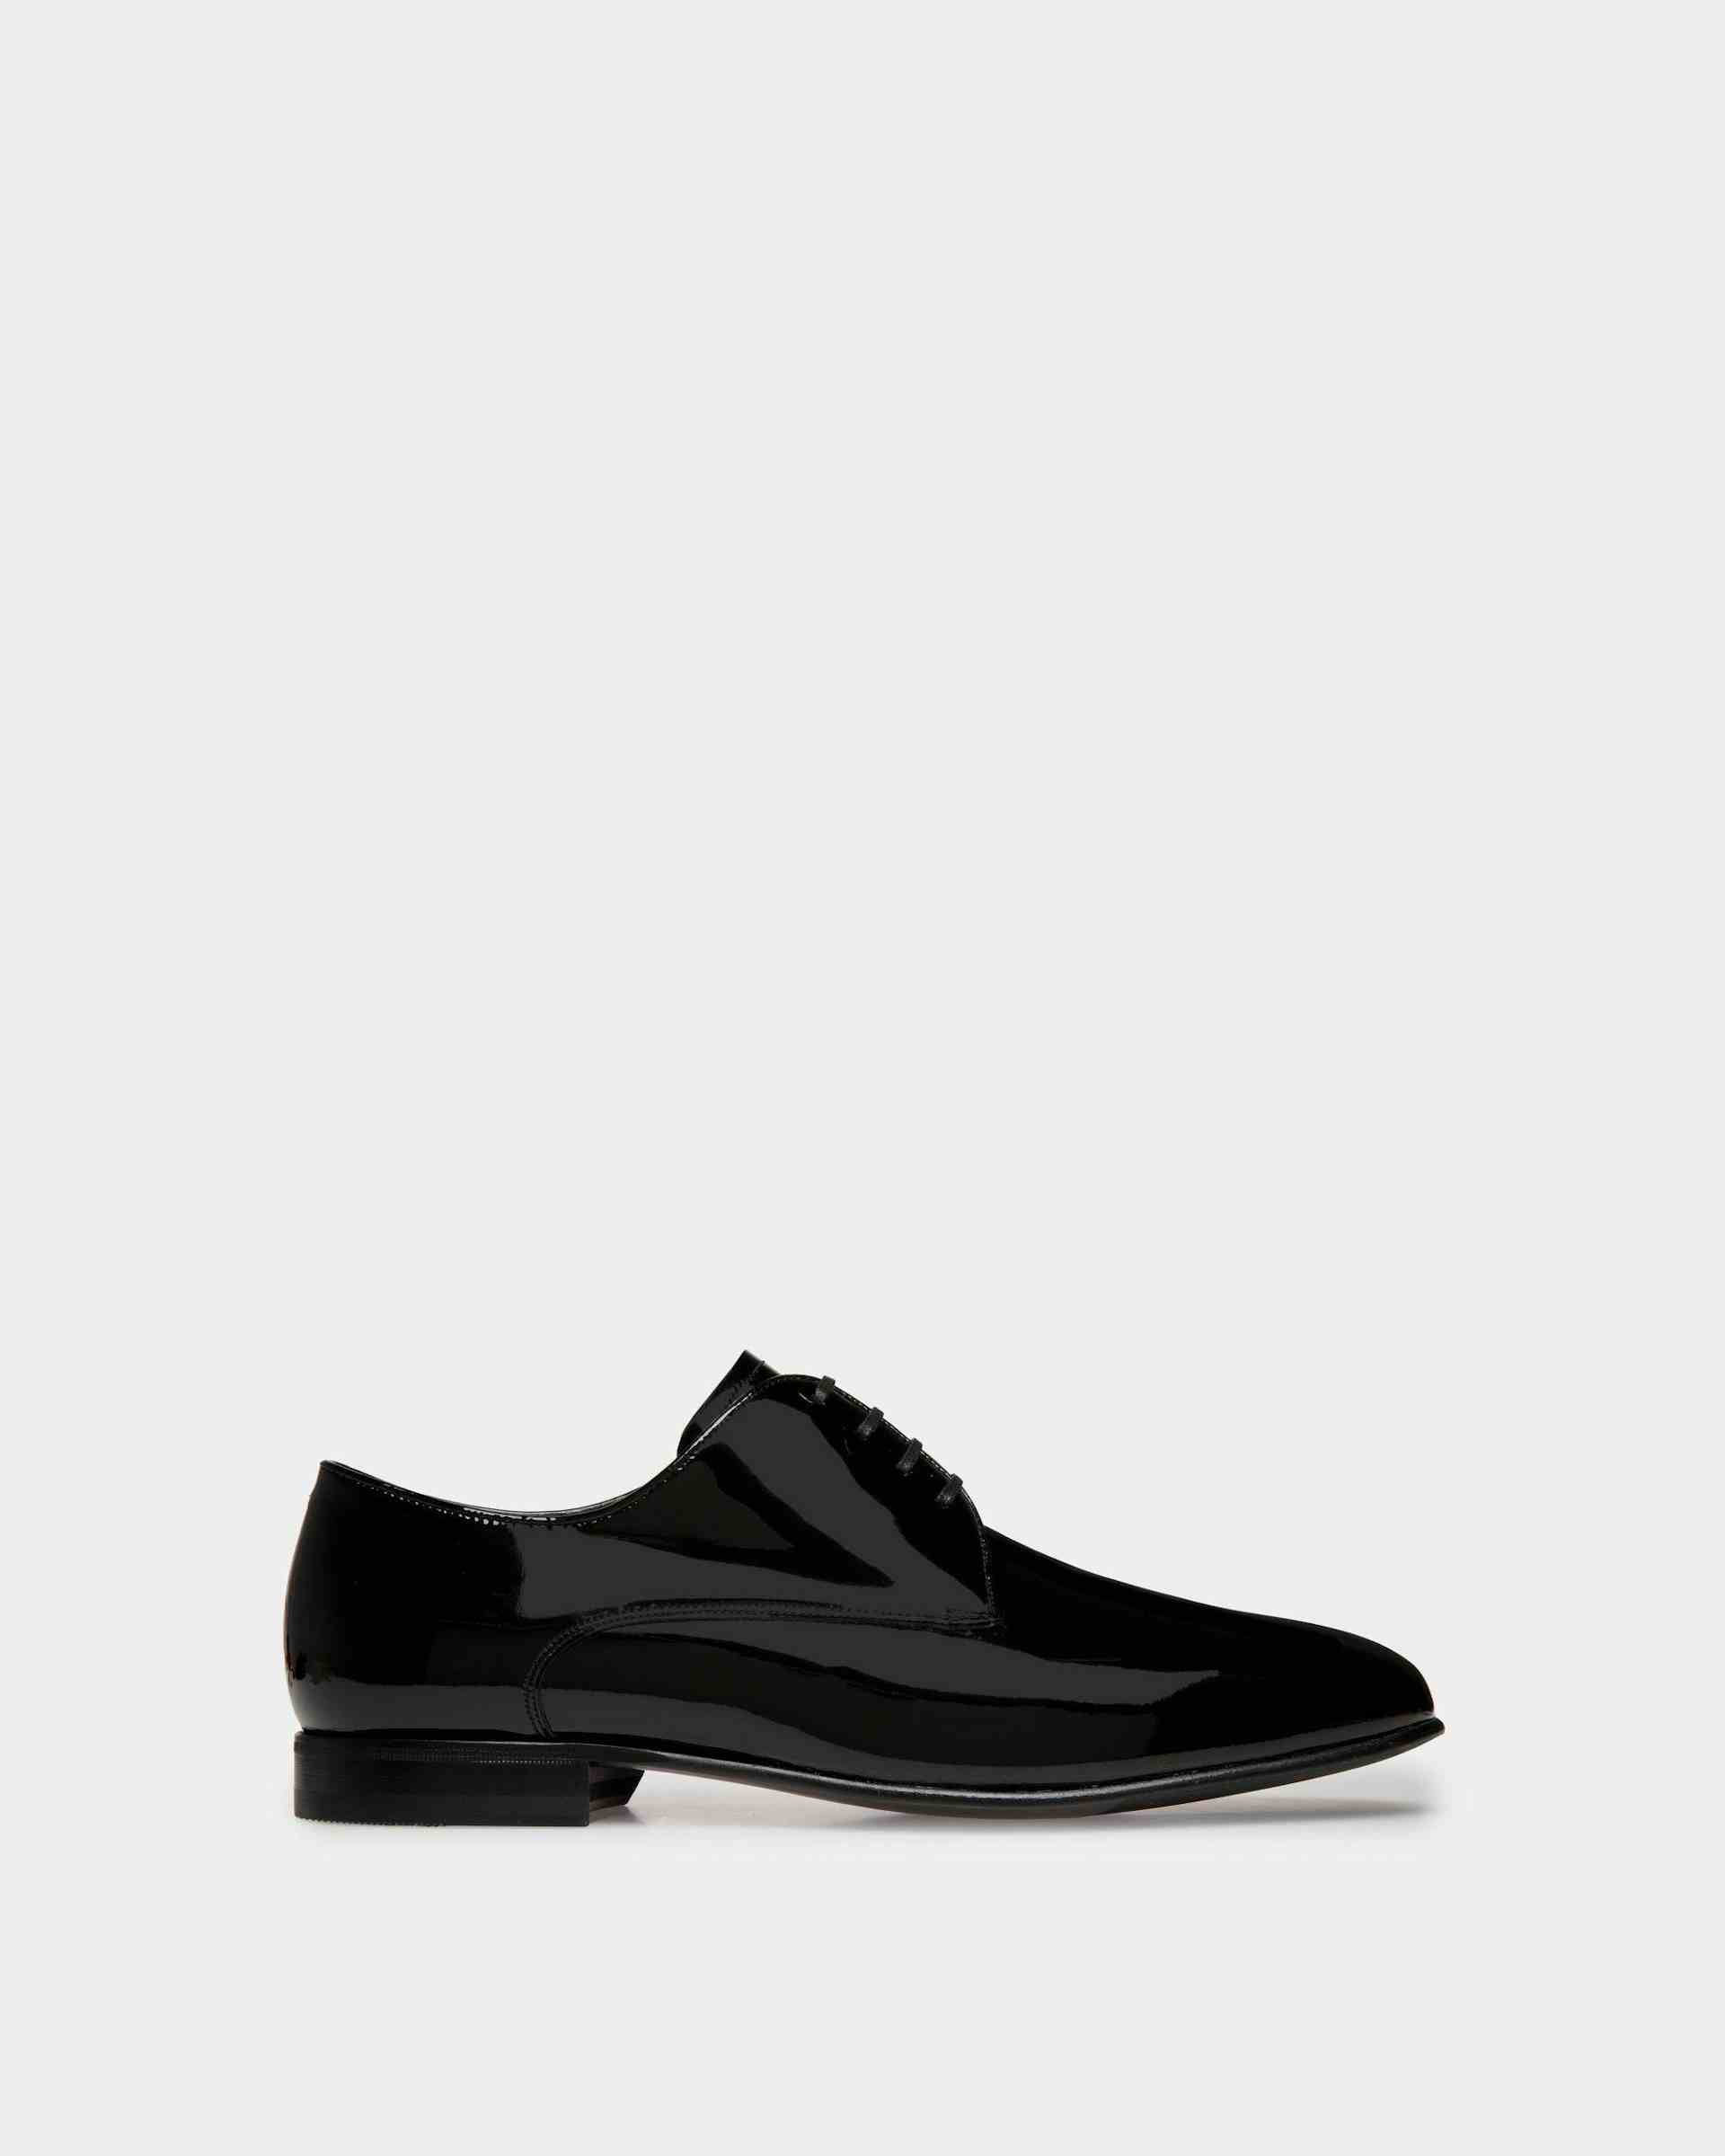 Suisse Derby in Black Patent Leather - Men's - Bally